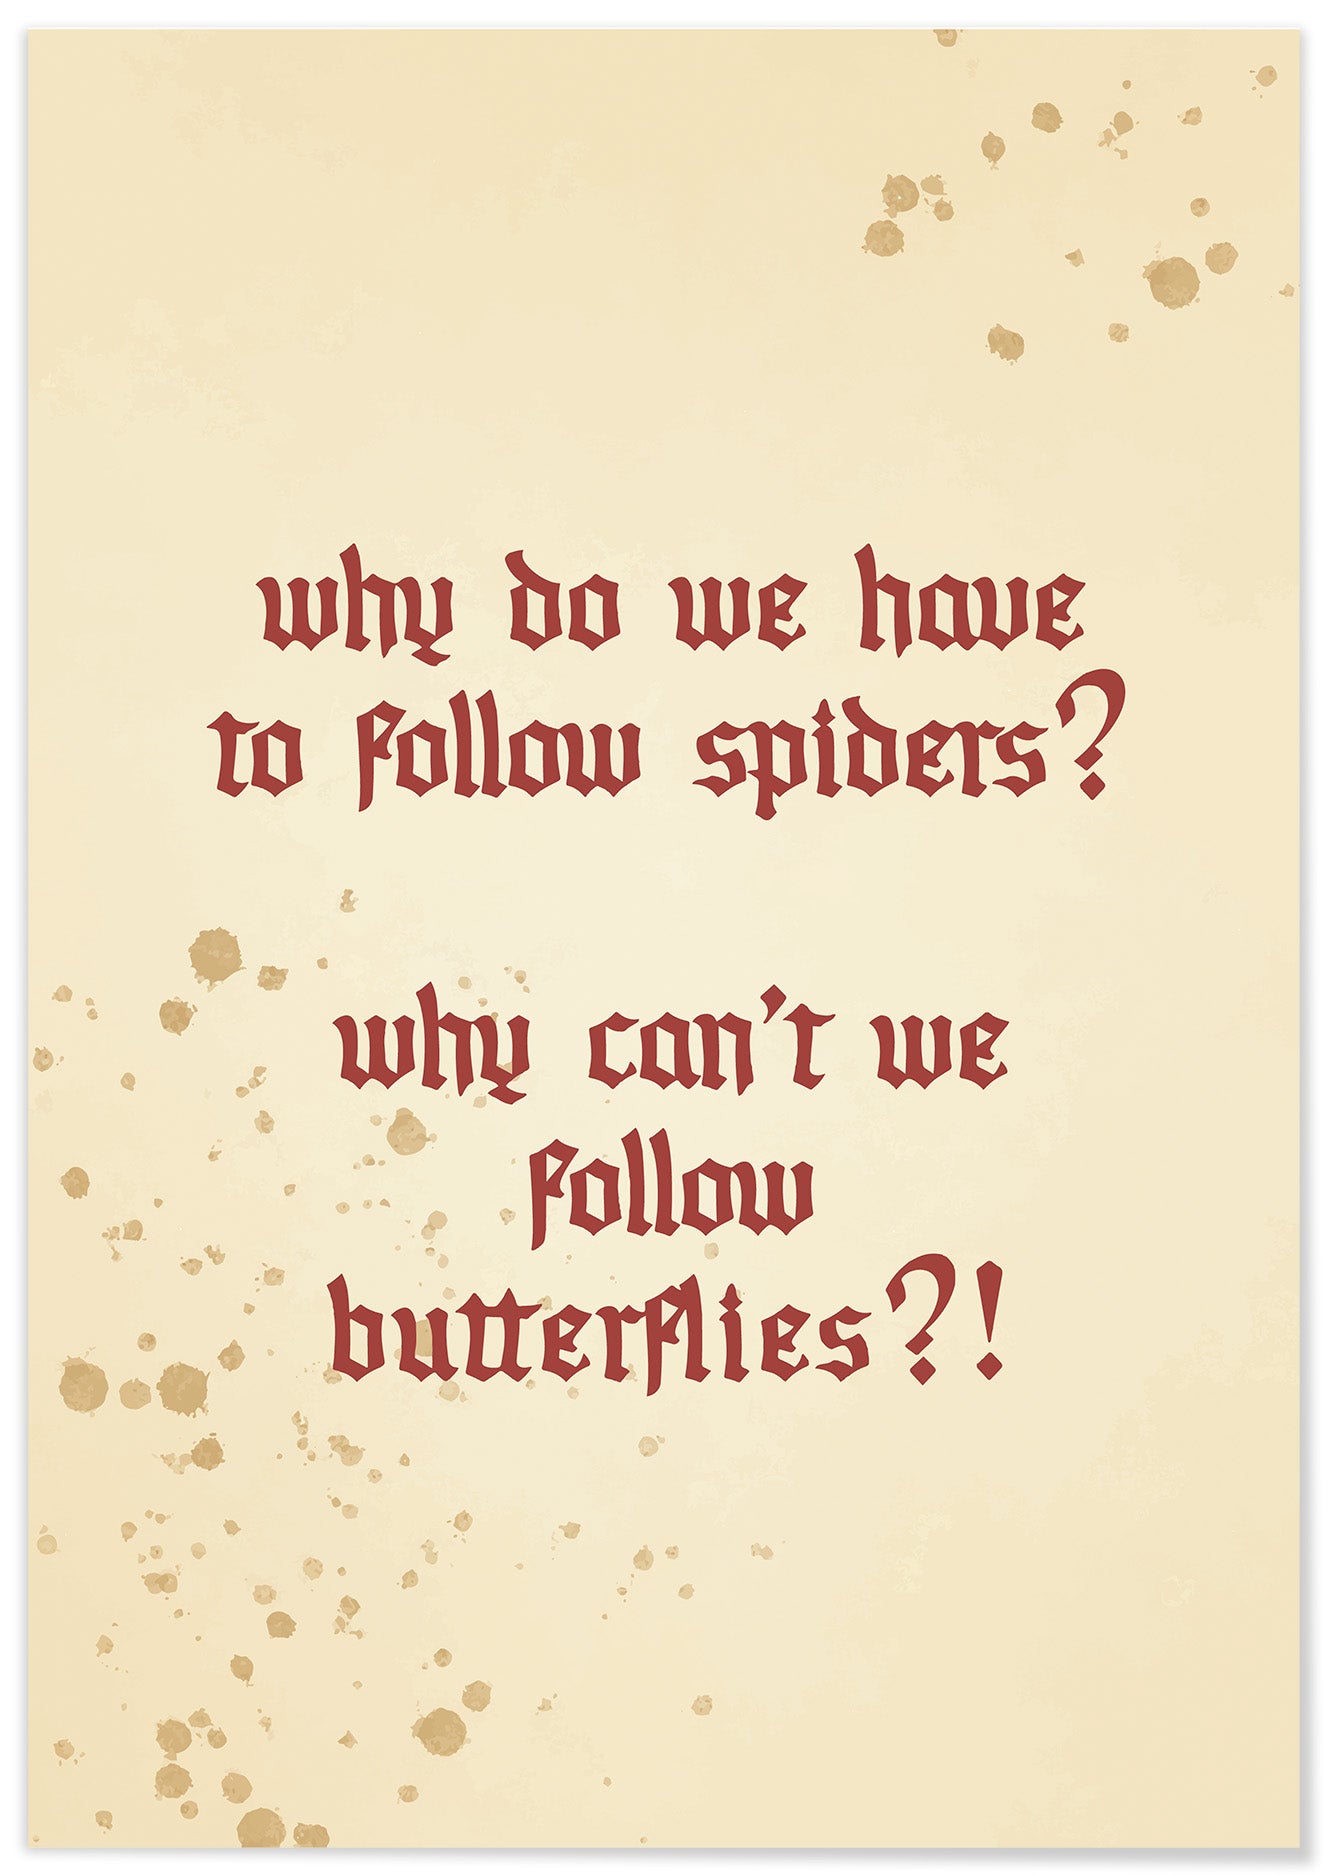 Why do we have to follow spiders? - @_yeazt_